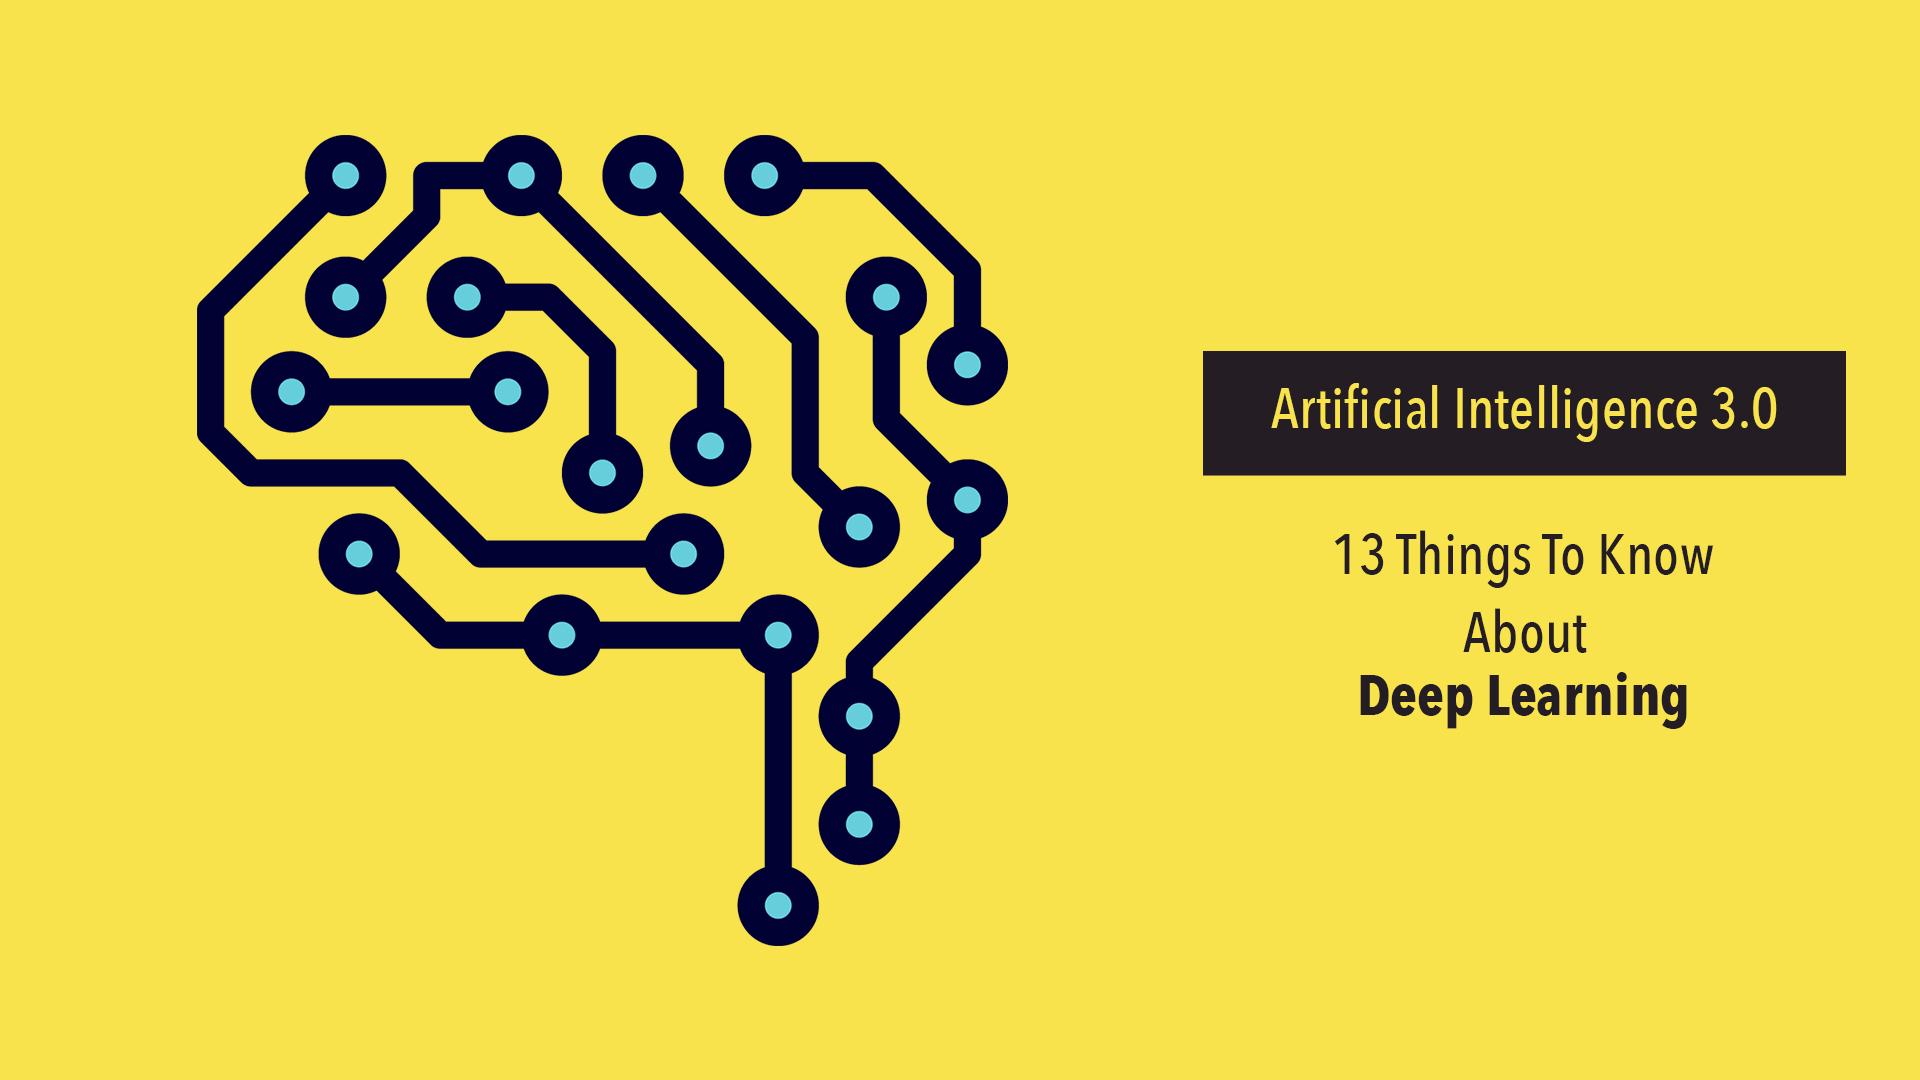 Artificial Intelligence 3.0: Things To Know About Deep Learning